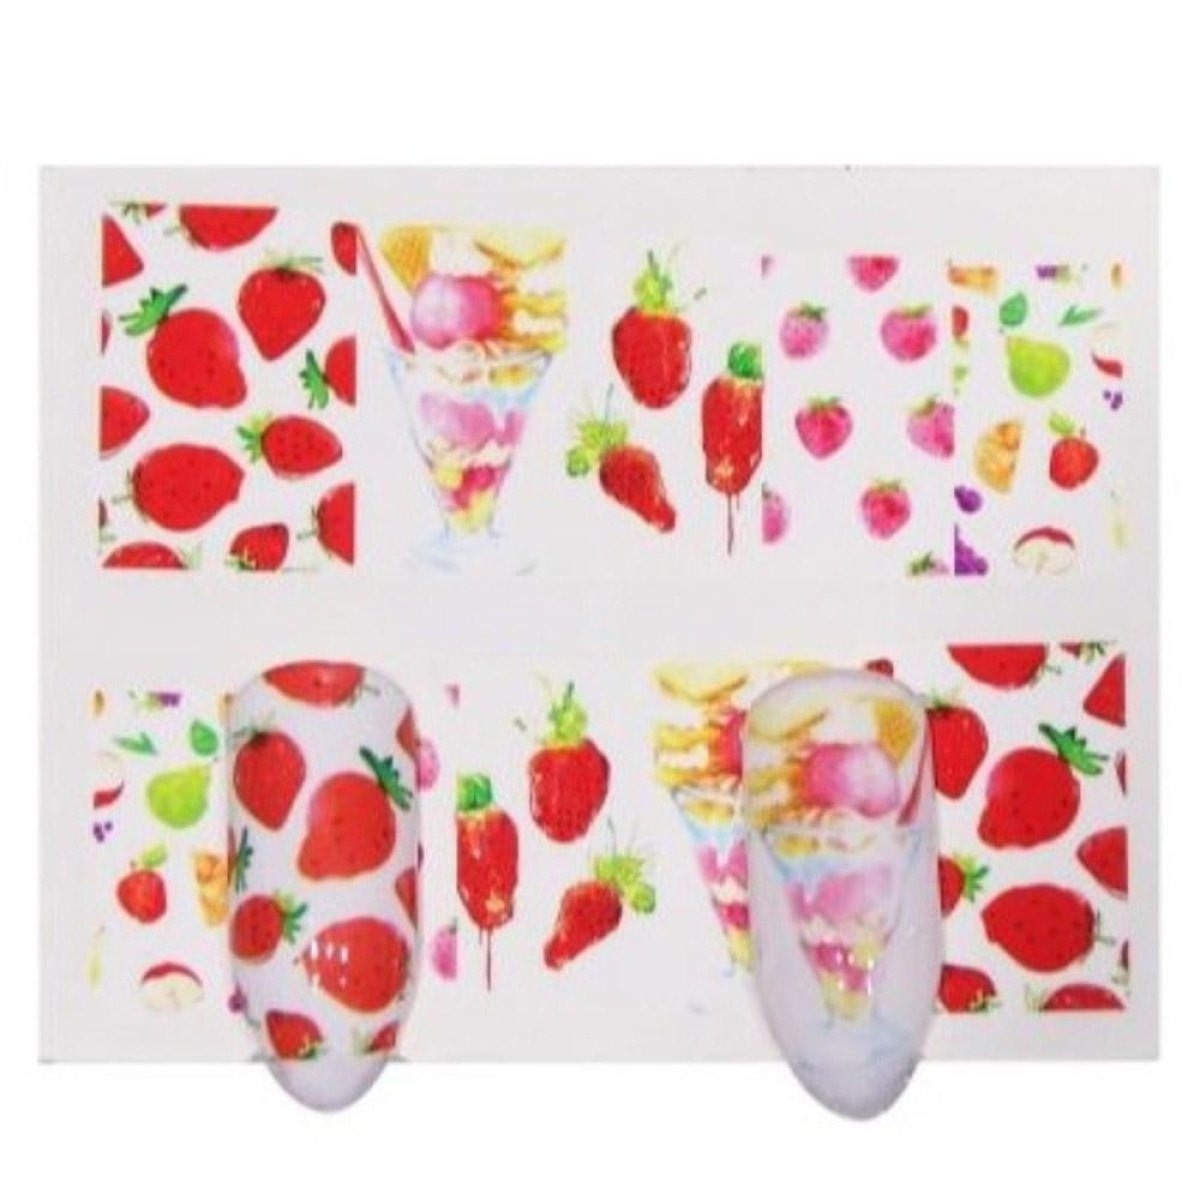 Strawberry Summer Cake & Fruit Stickers For Nails Nail Manicure Art Stz-461 - Sheet